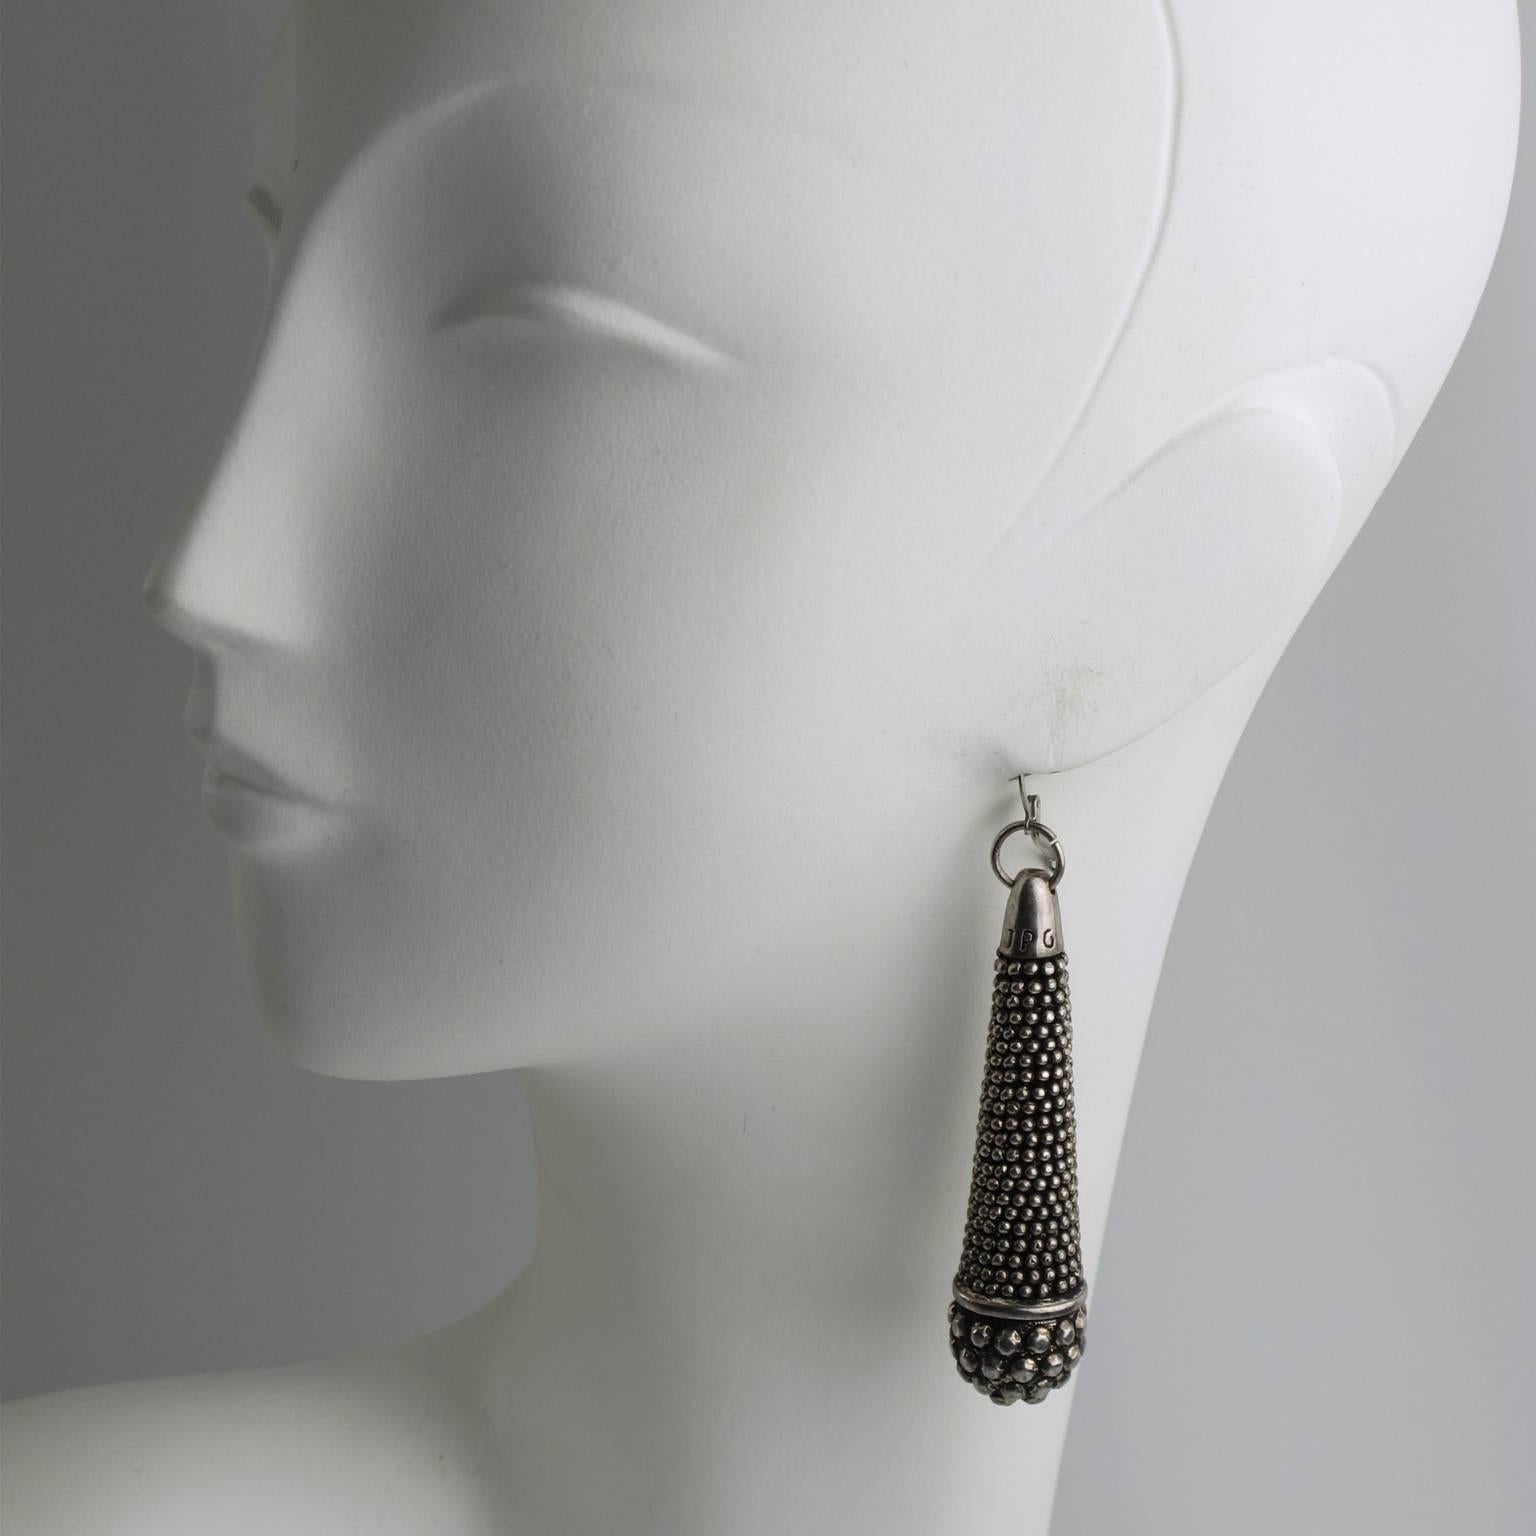 Rare oversized dangling ethnic inspired earrings by French couture designer Jean Paul Gaultier. Featuring long tubular form in silvered metal with aged patina and bead pattern design. For pierced ears. Engraved 'JPG' logo on top of each earring.